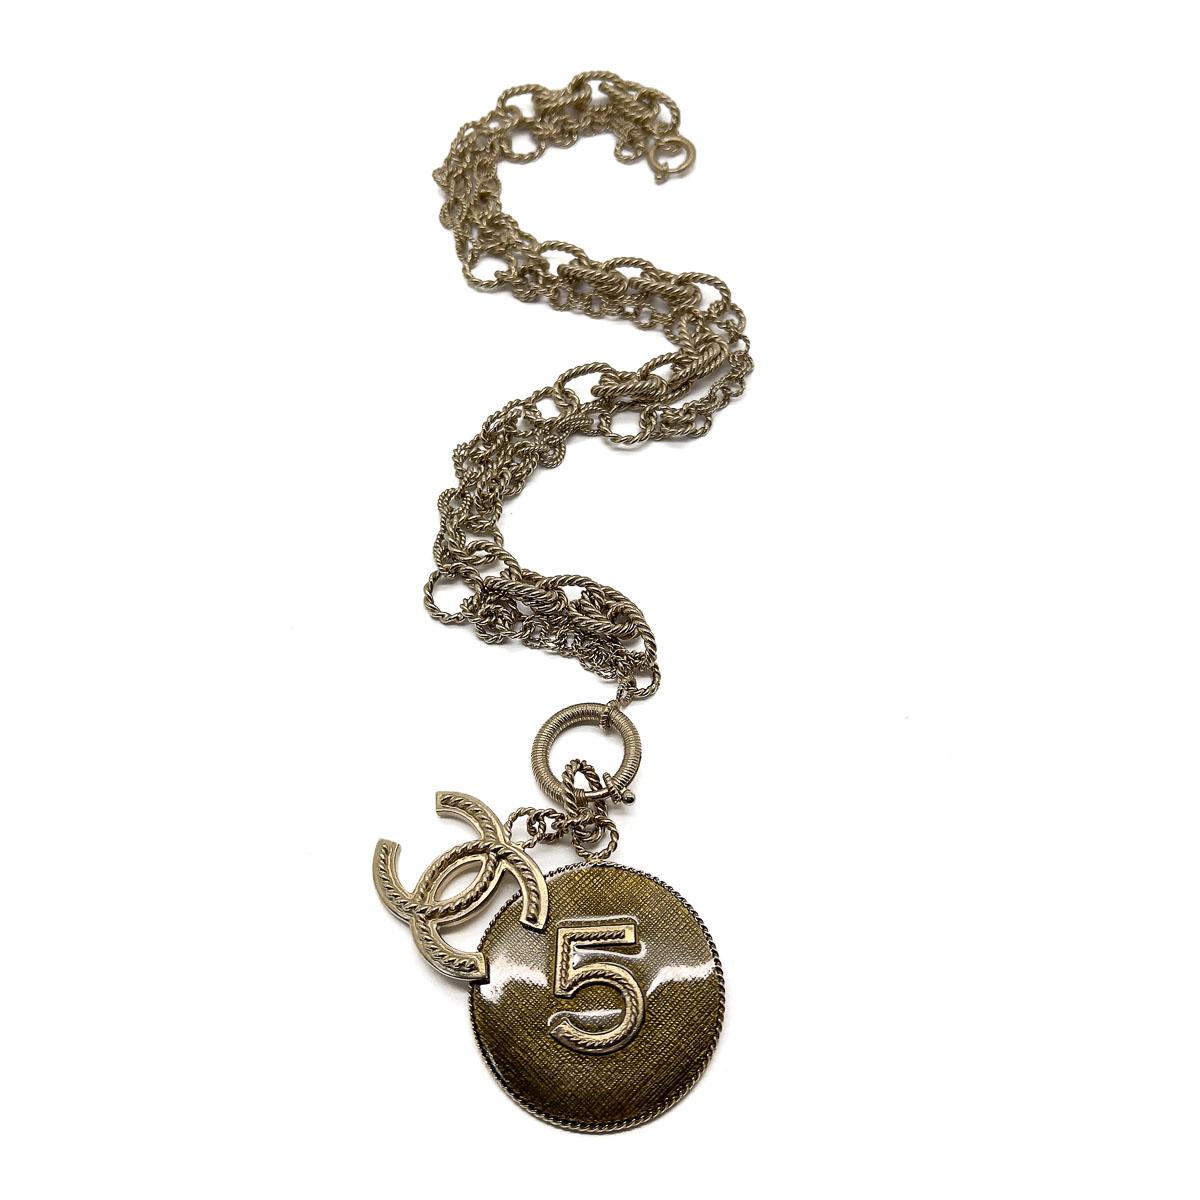 Vintage Chanel Statement No. 5 Rope Chain Charm Necklace 2013 For Sale 1